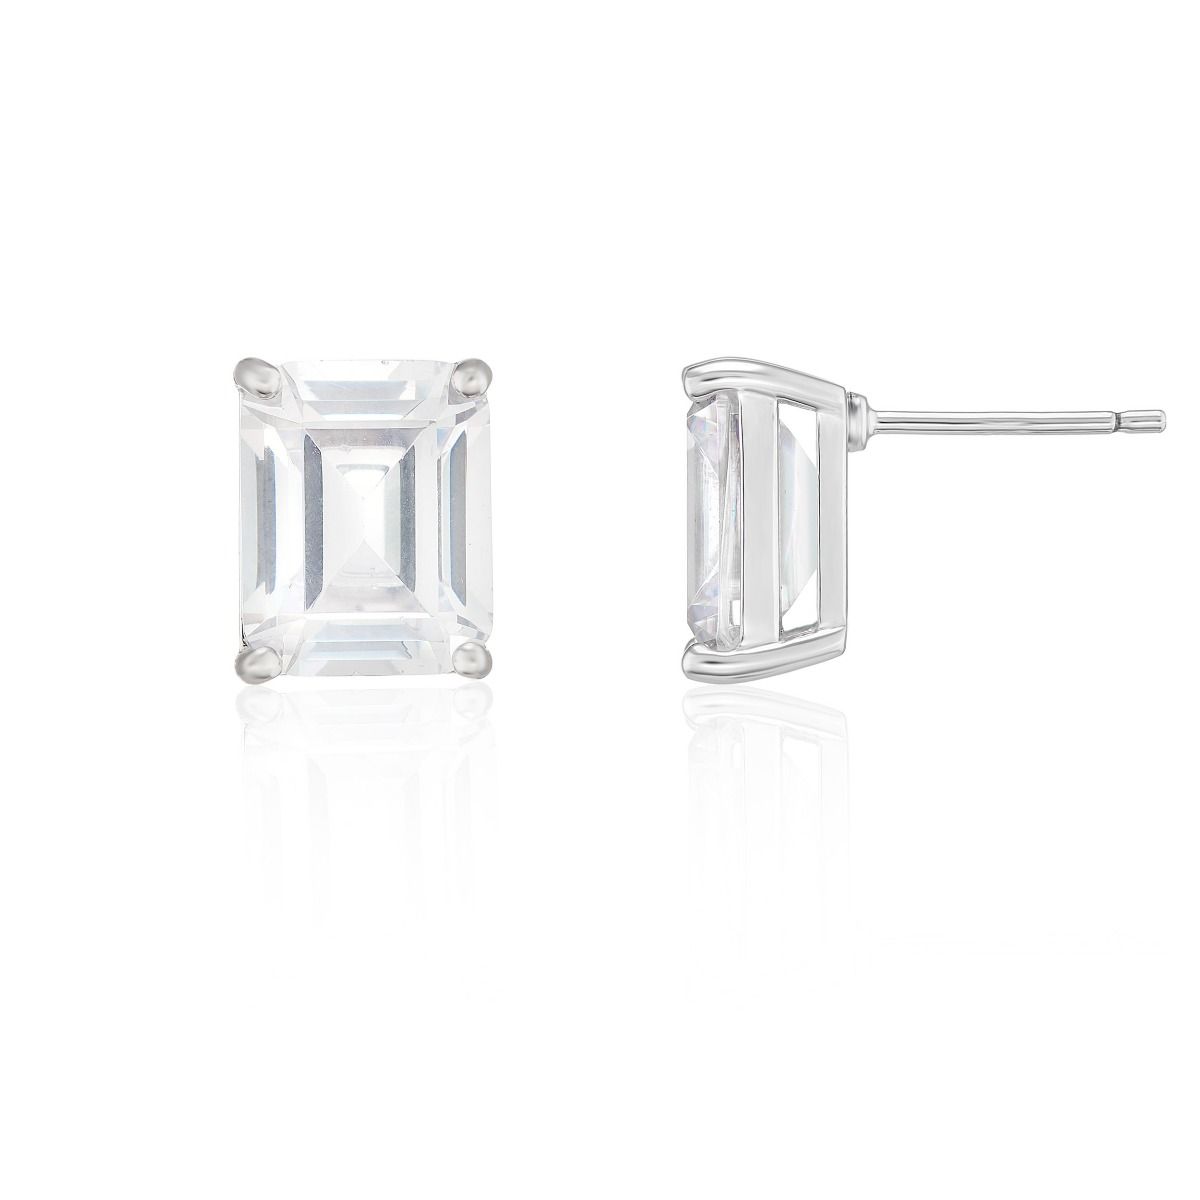 BUCKLEY LONDON The Flawless Collection - Baguette Solitaire Earrings